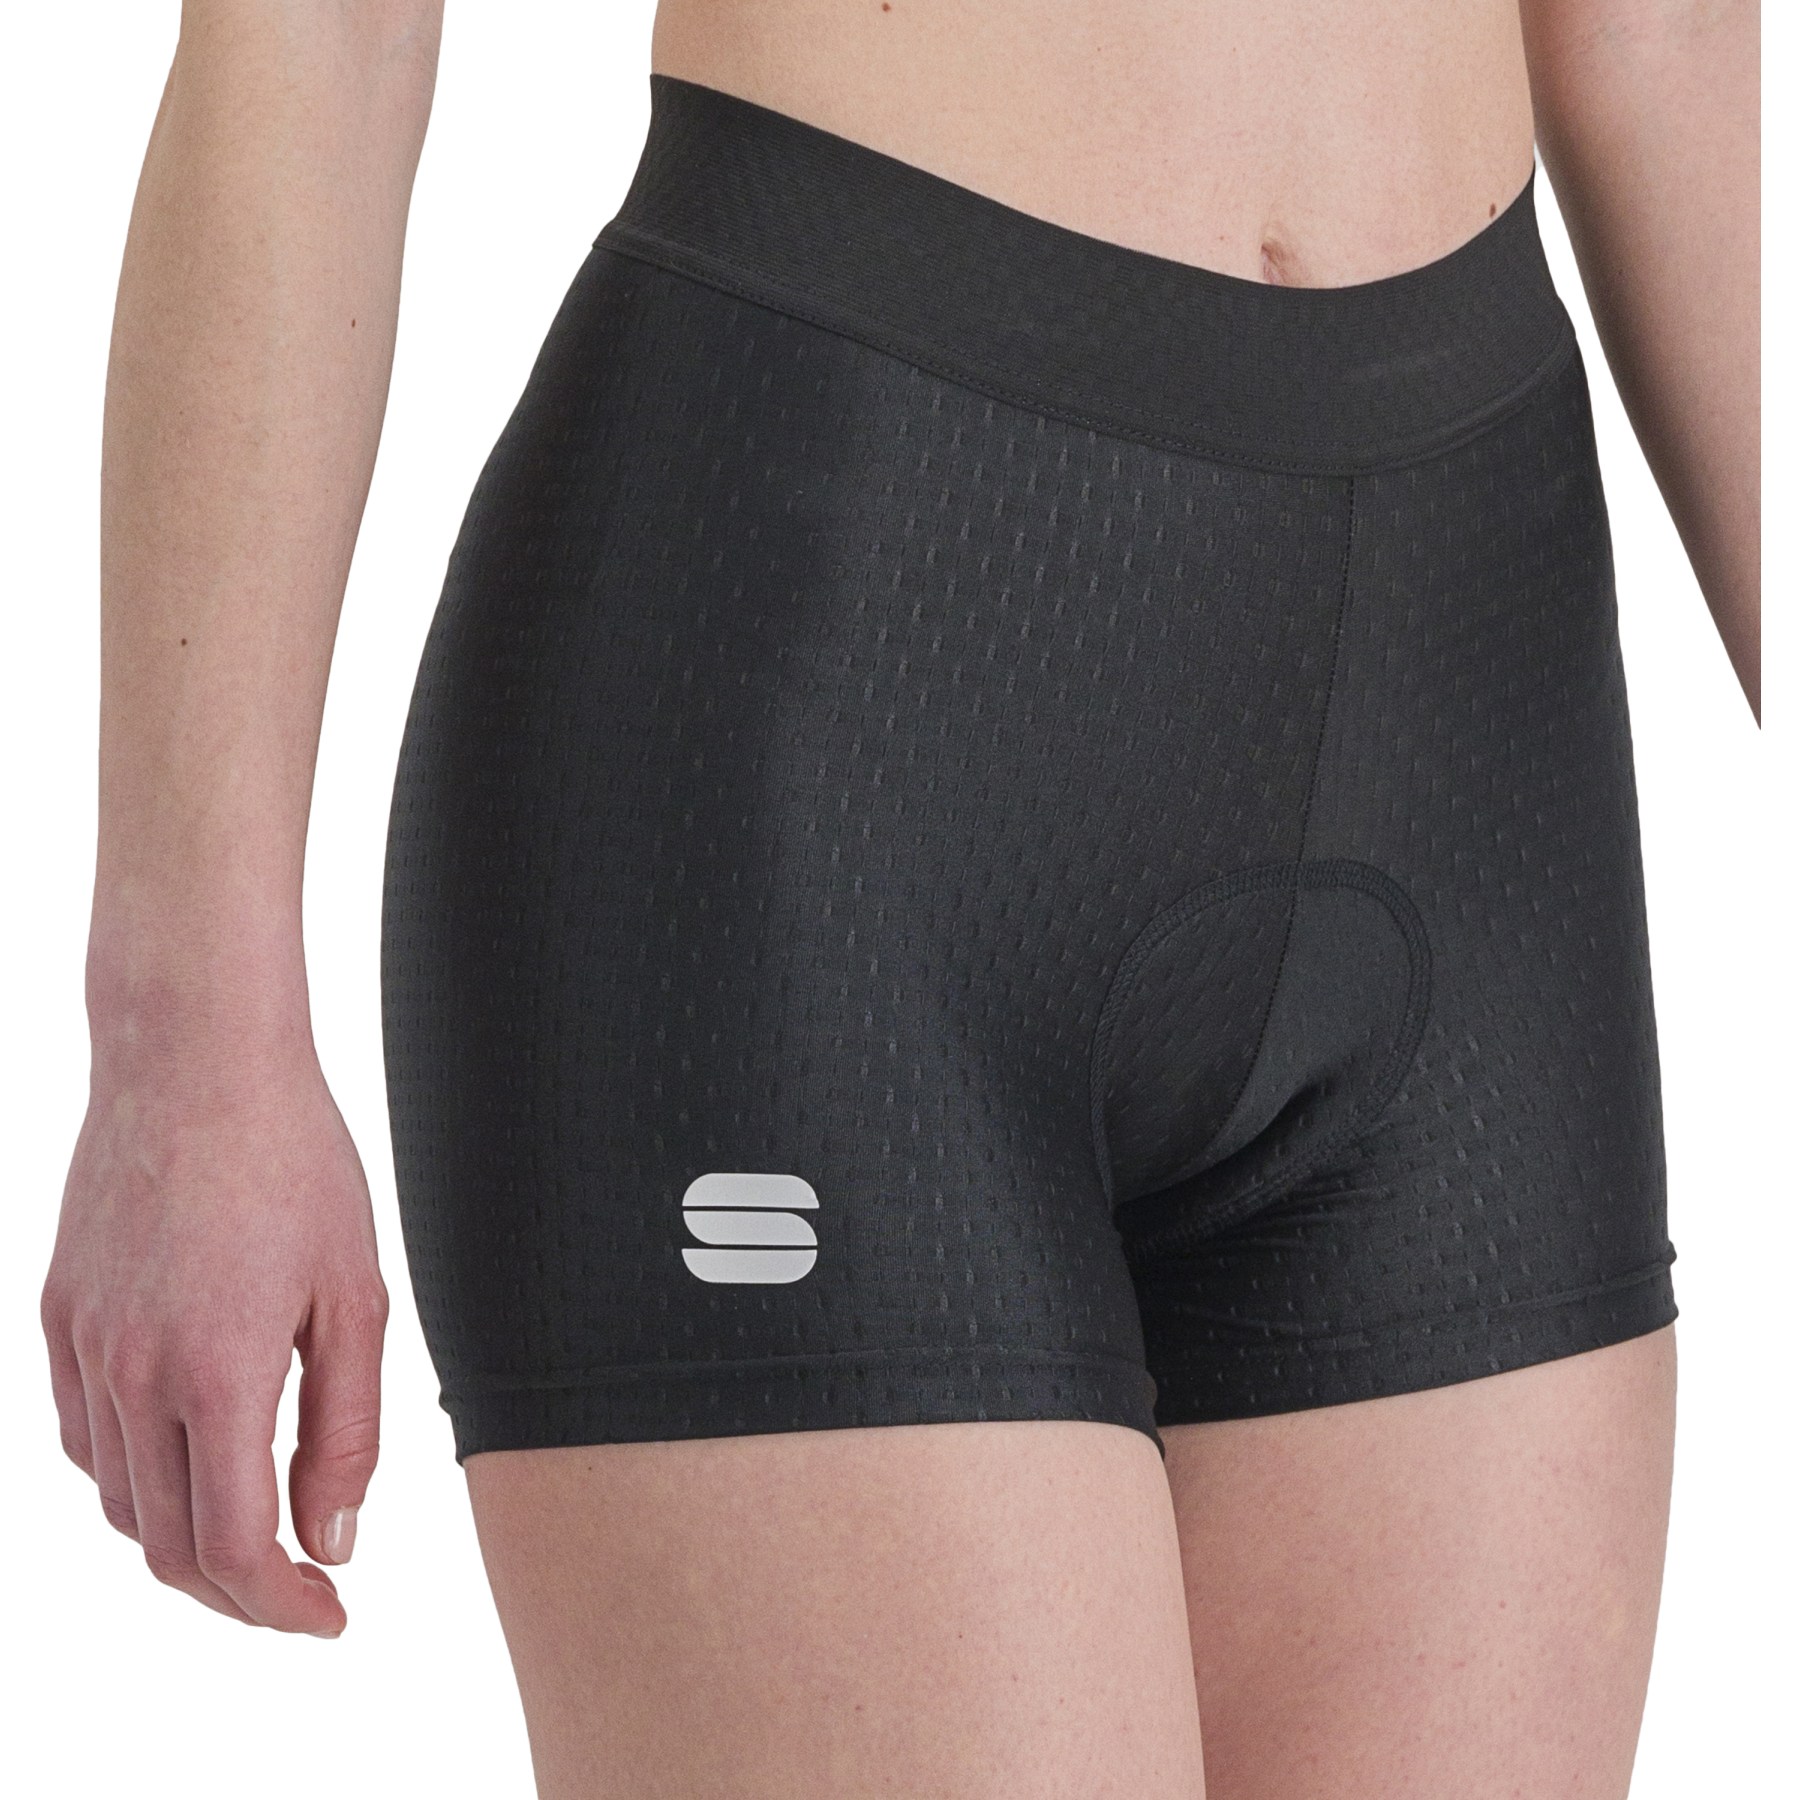 Picture of Sportful Cycling Women Undershorts - 002 Black